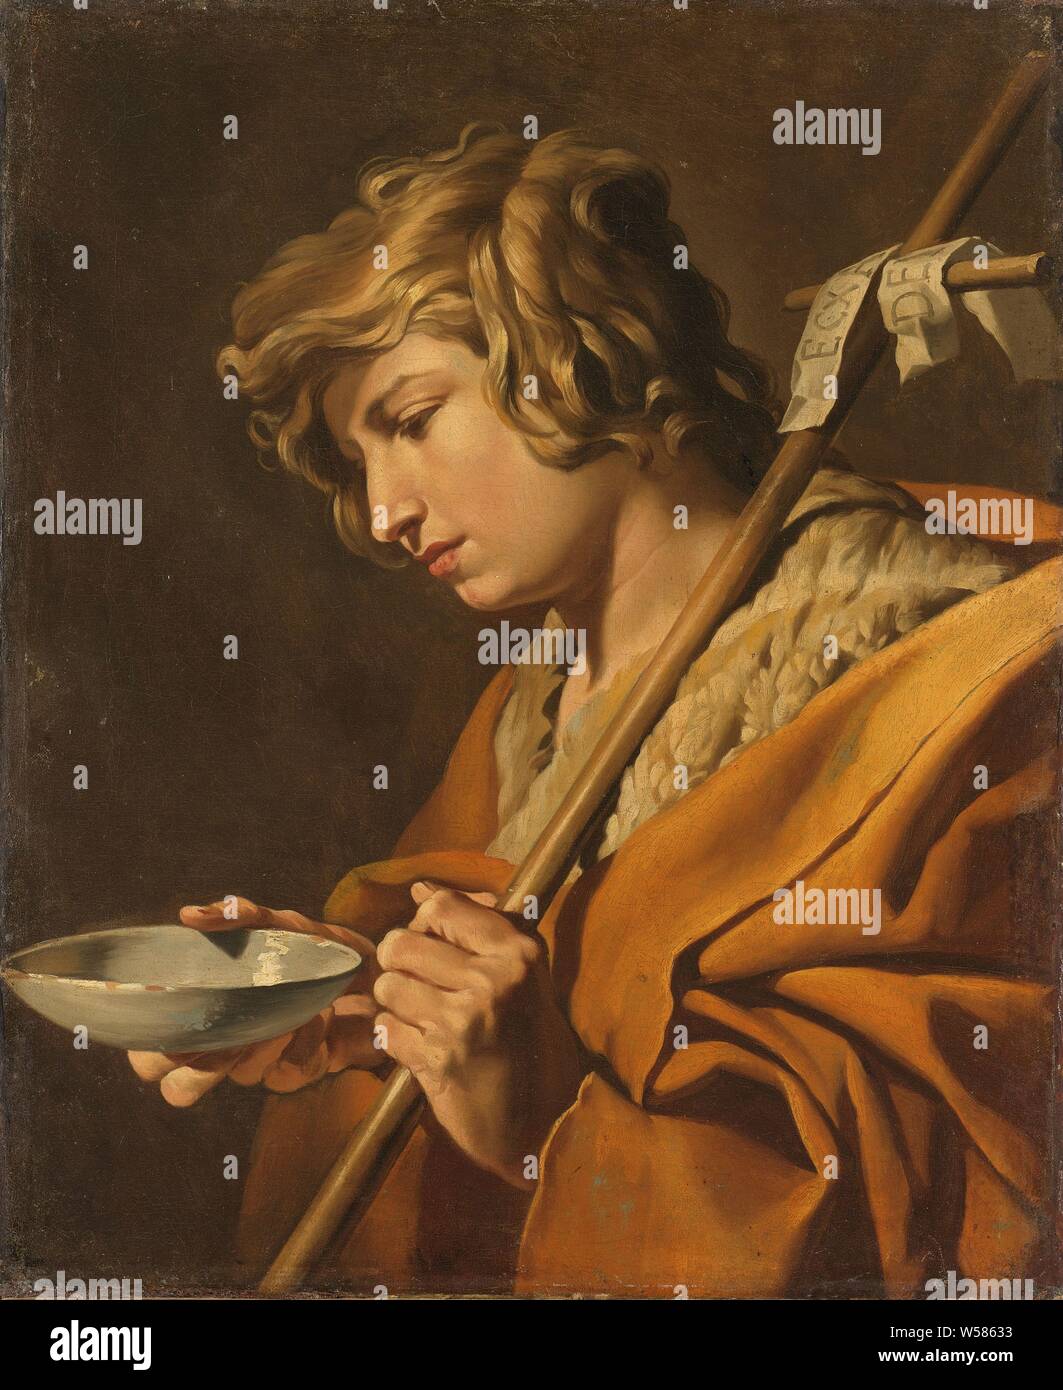 St John the Baptist, John the Baptist, half-figure in profile to the left, a bowl of water in the right hand and a staff over the shoulder., Matthias Stom (attributed to), 1630 - 1650, canvas, oil paint (paint), support: h 73.3 cm × w 60.5 cm sightsize: h 71.3 cm × w 58.7 cm Stock Photo